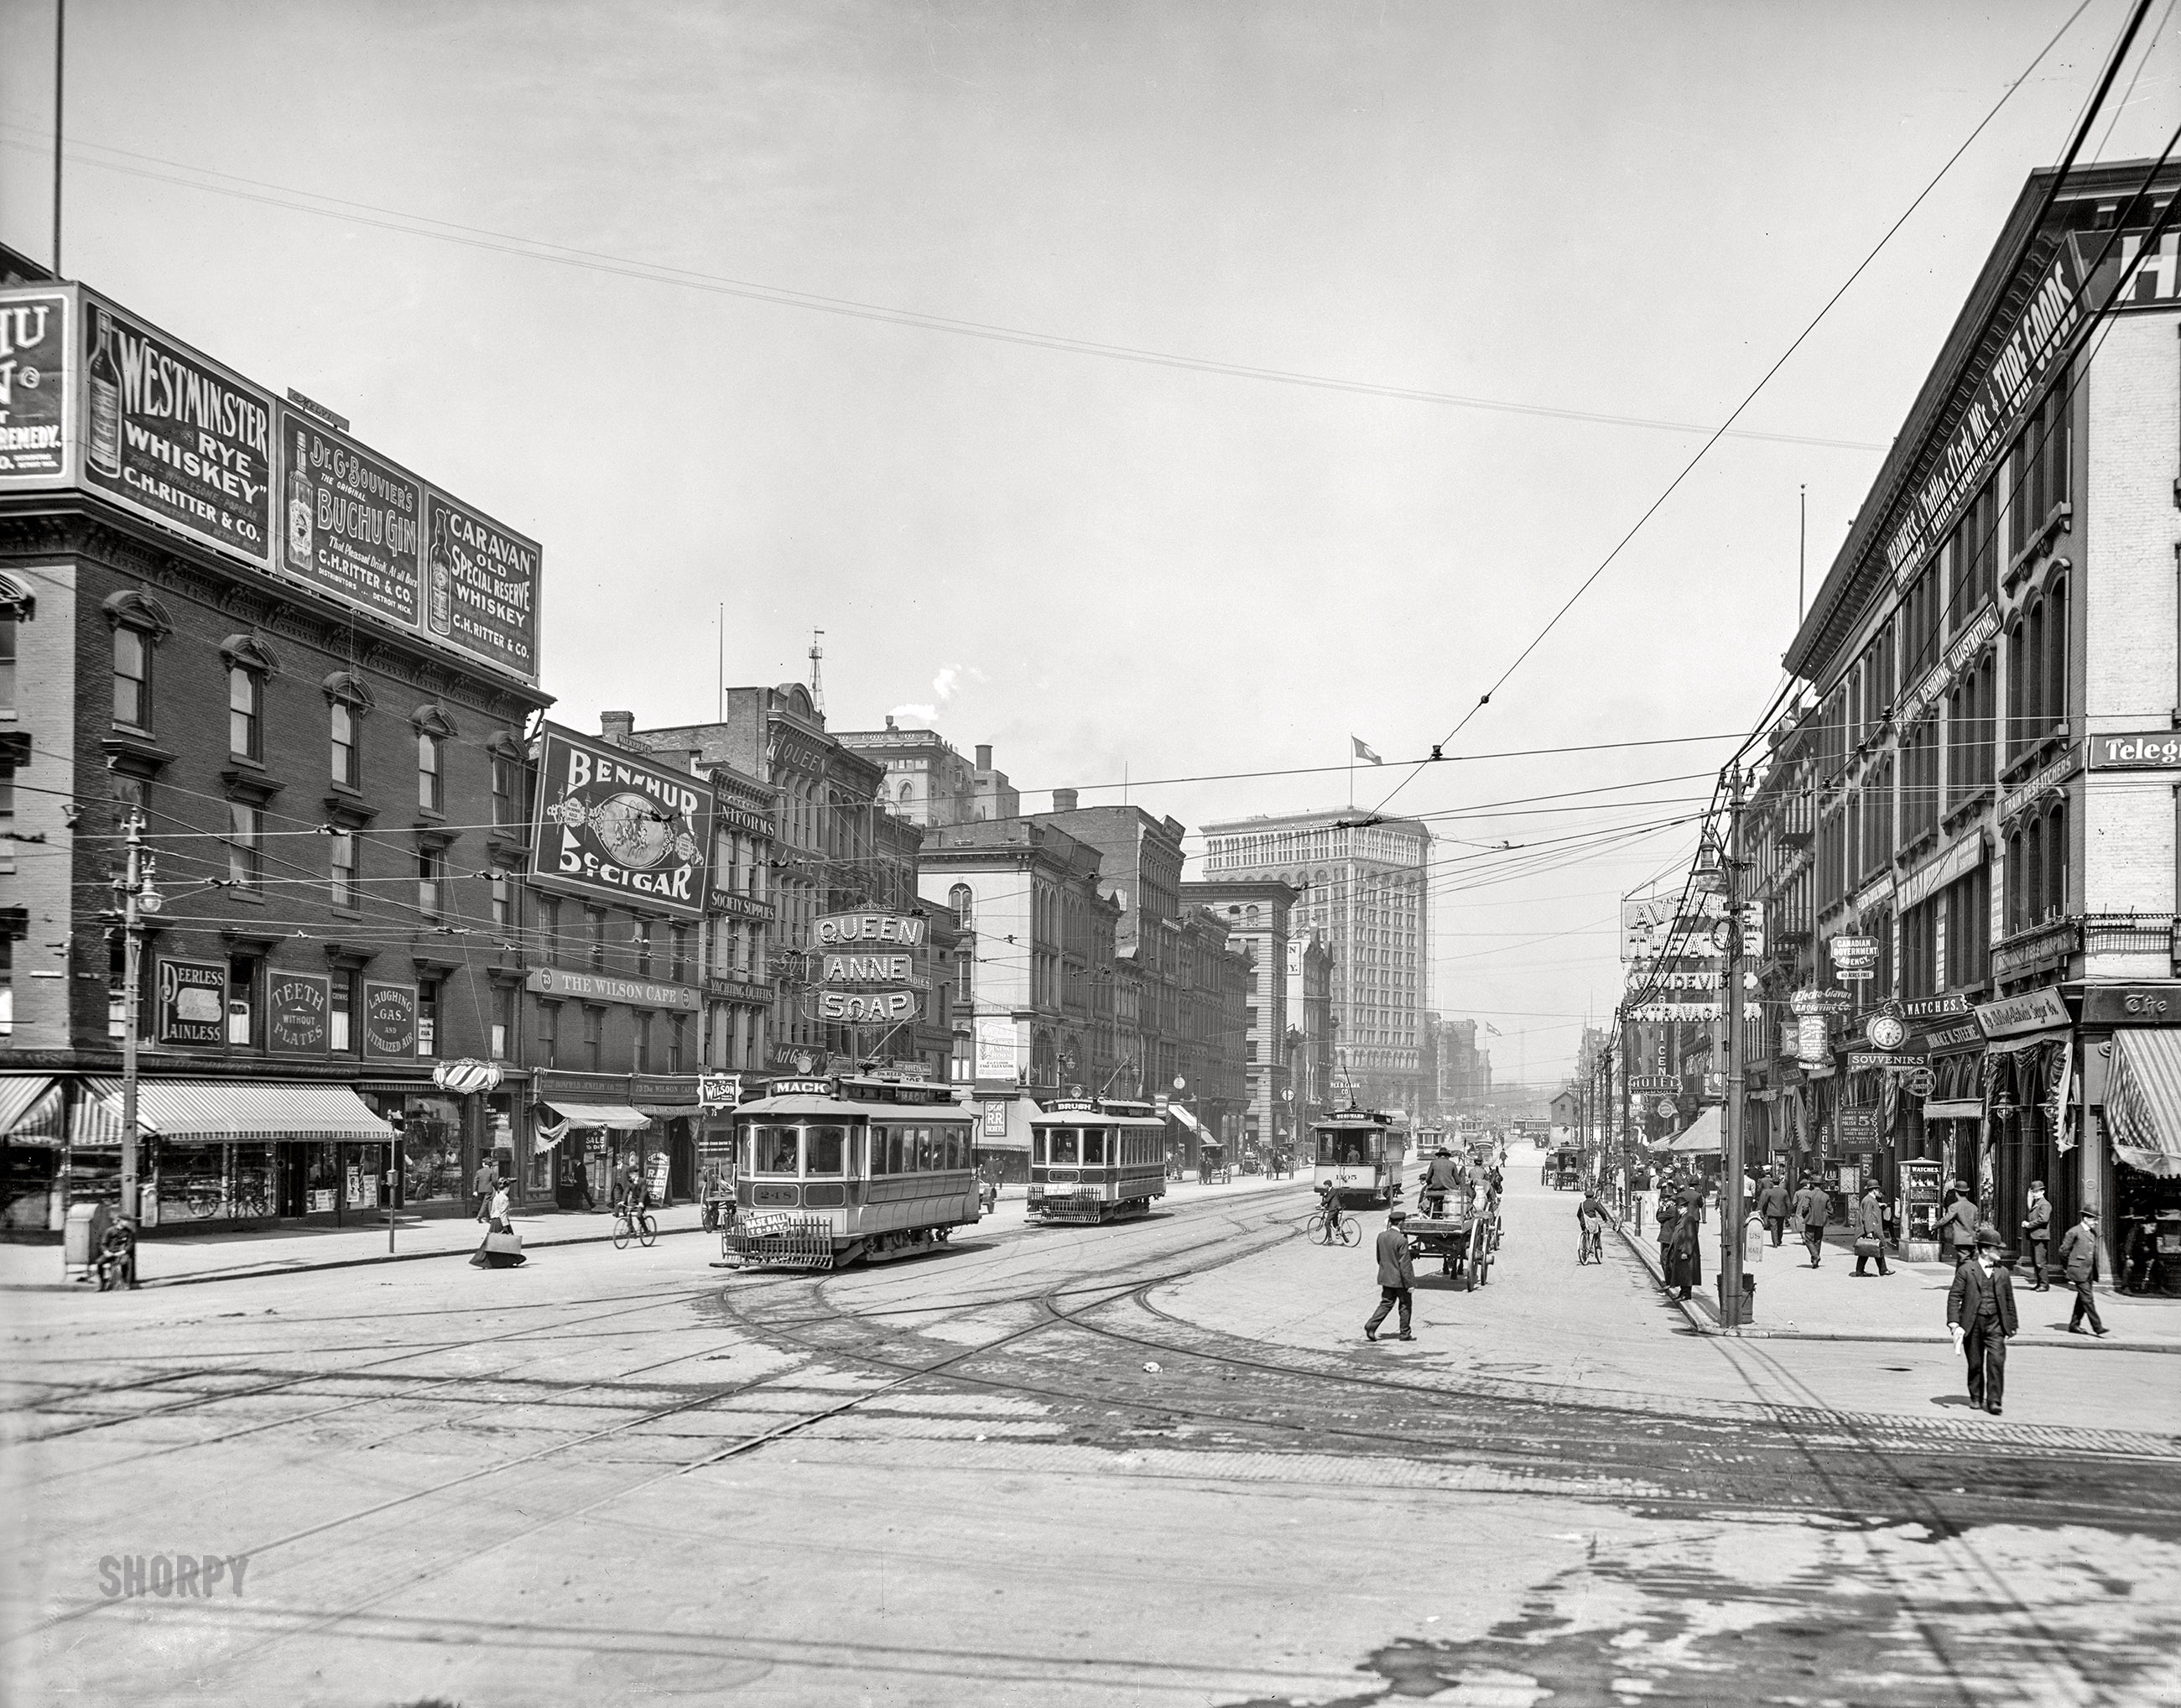 Detroit circa 1905. "Woodward Avenue north from Jefferson." A phantasmagoria of signage advertising vaudeville, soap, cigars and the mandatory Painless Dental Parlors (your choice of Laughing Gas or "Vitalized Air"). 8x10 inch glass negative, Detroit Publishing Co. View full size.